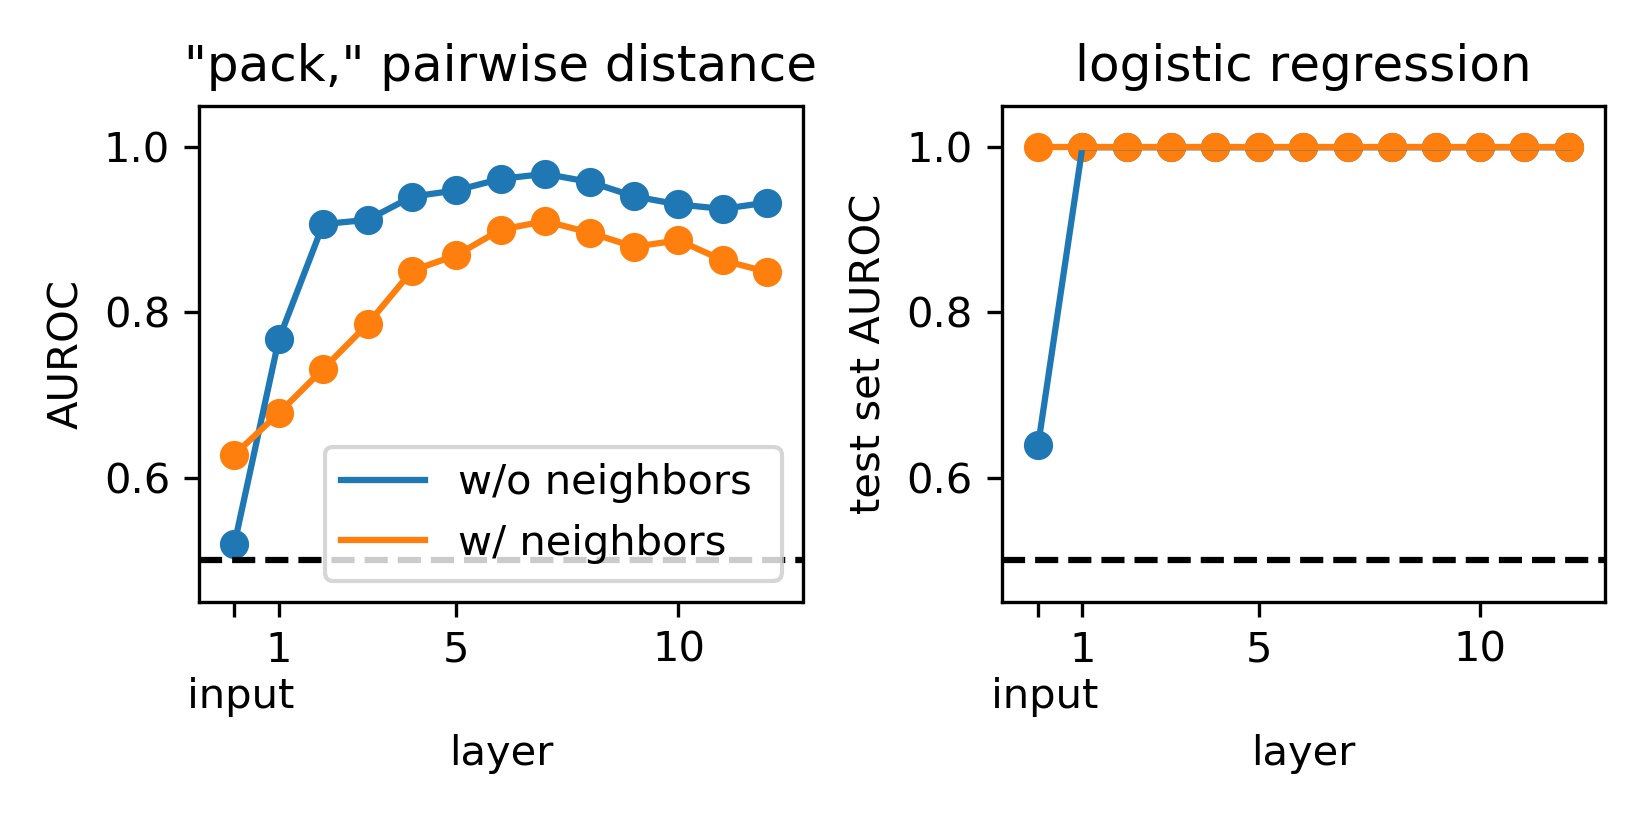 Linear separability of representations, by layer